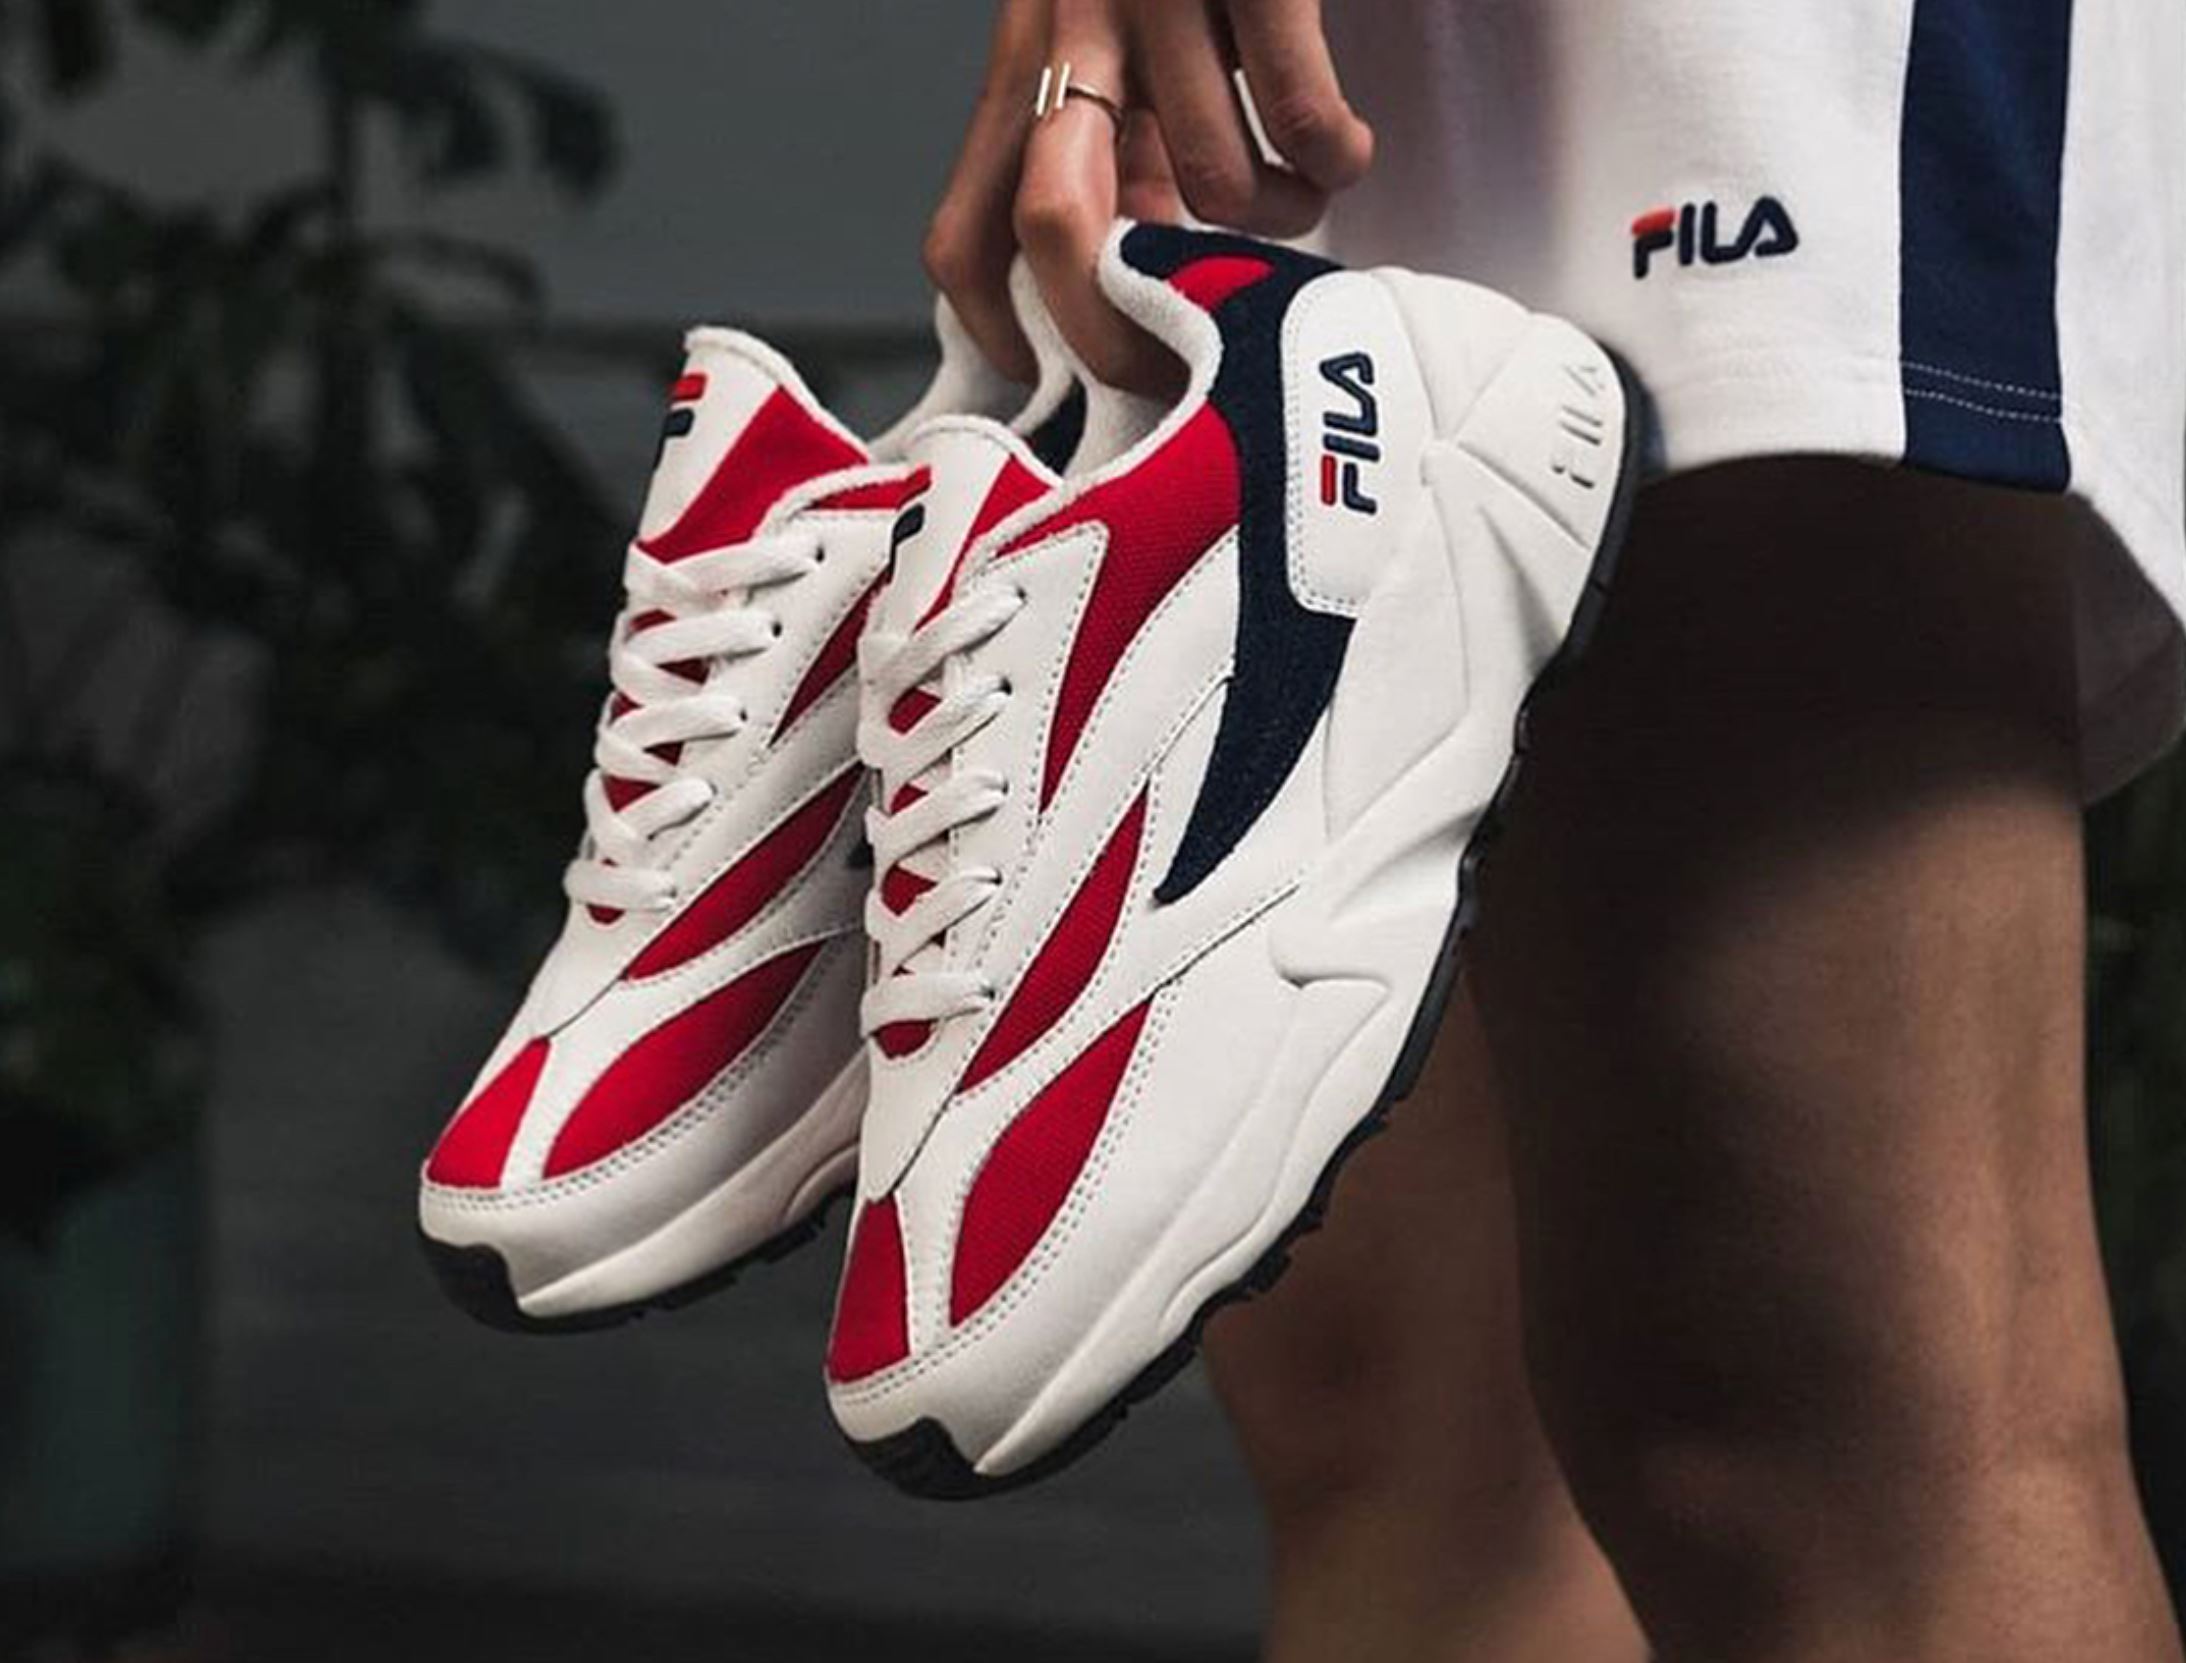 Ambicioso Hundimiento empezar The Fila Venom Has Exited the Archive for Today's Bulky Shoe Trend -  WearTesters